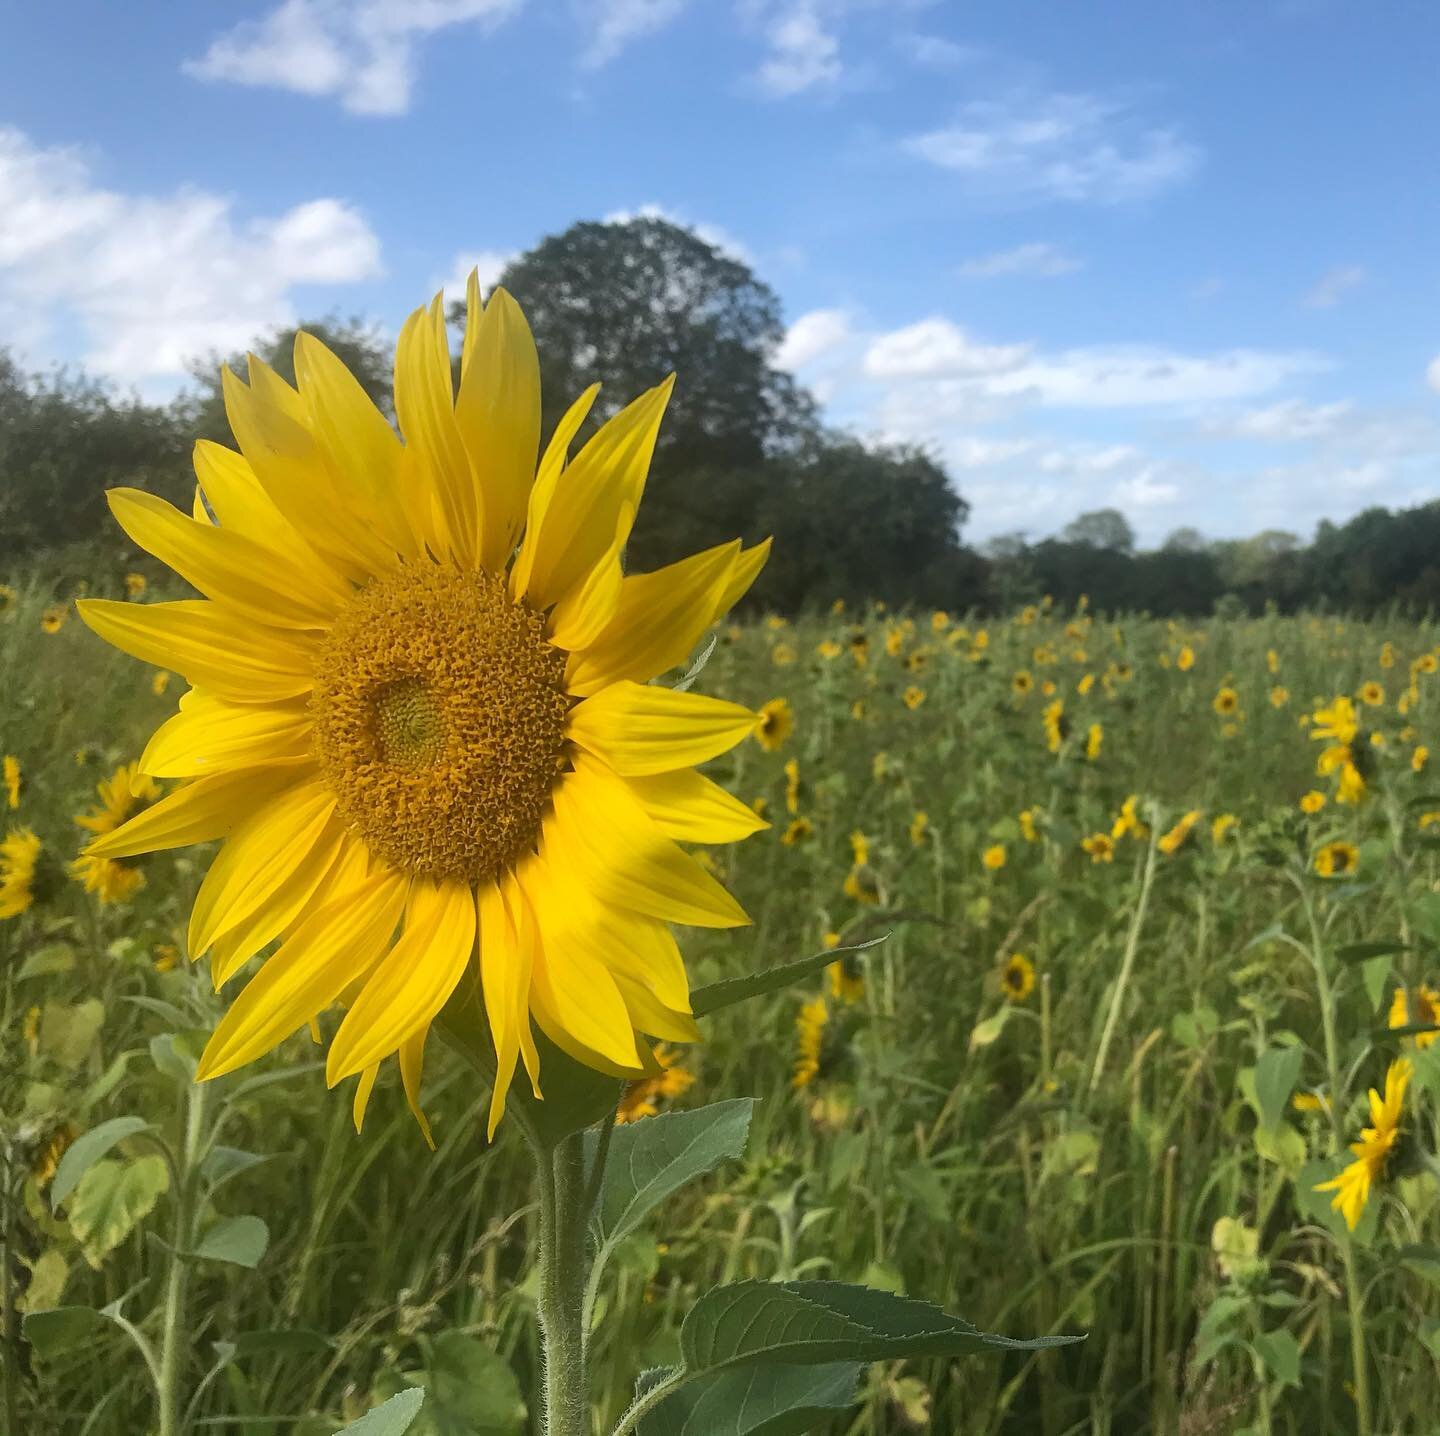 Tournesol 🌻 - the name in French for a Sunflower! It means &lsquo;turn to the sun&rsquo;, which is what sunflowers do throughout the day.

If you want to sleep well, try upping your sunlight intake throughout the day - have breakfast or work by a wi